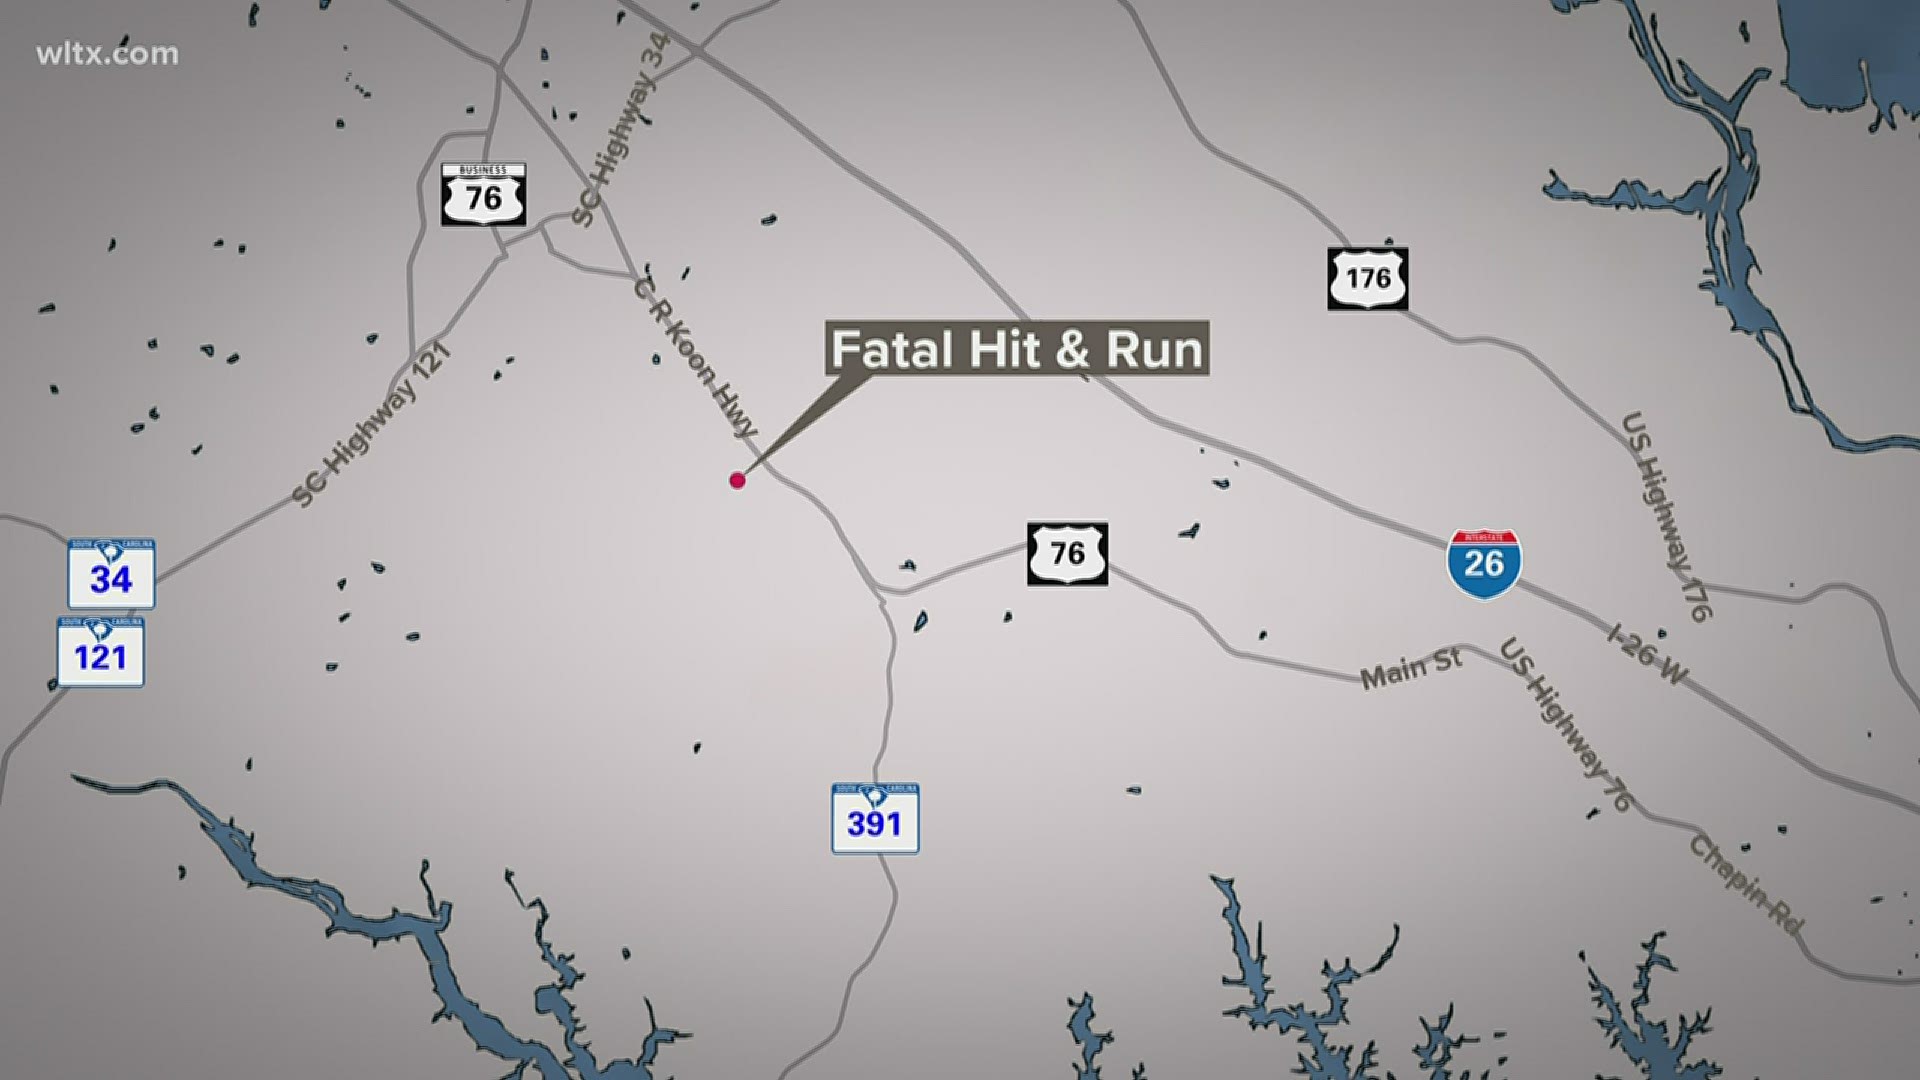 SC Highway Patrol searching for Nissan Altima involved in incident that occurred around 11 p.m. July 1 on US 76